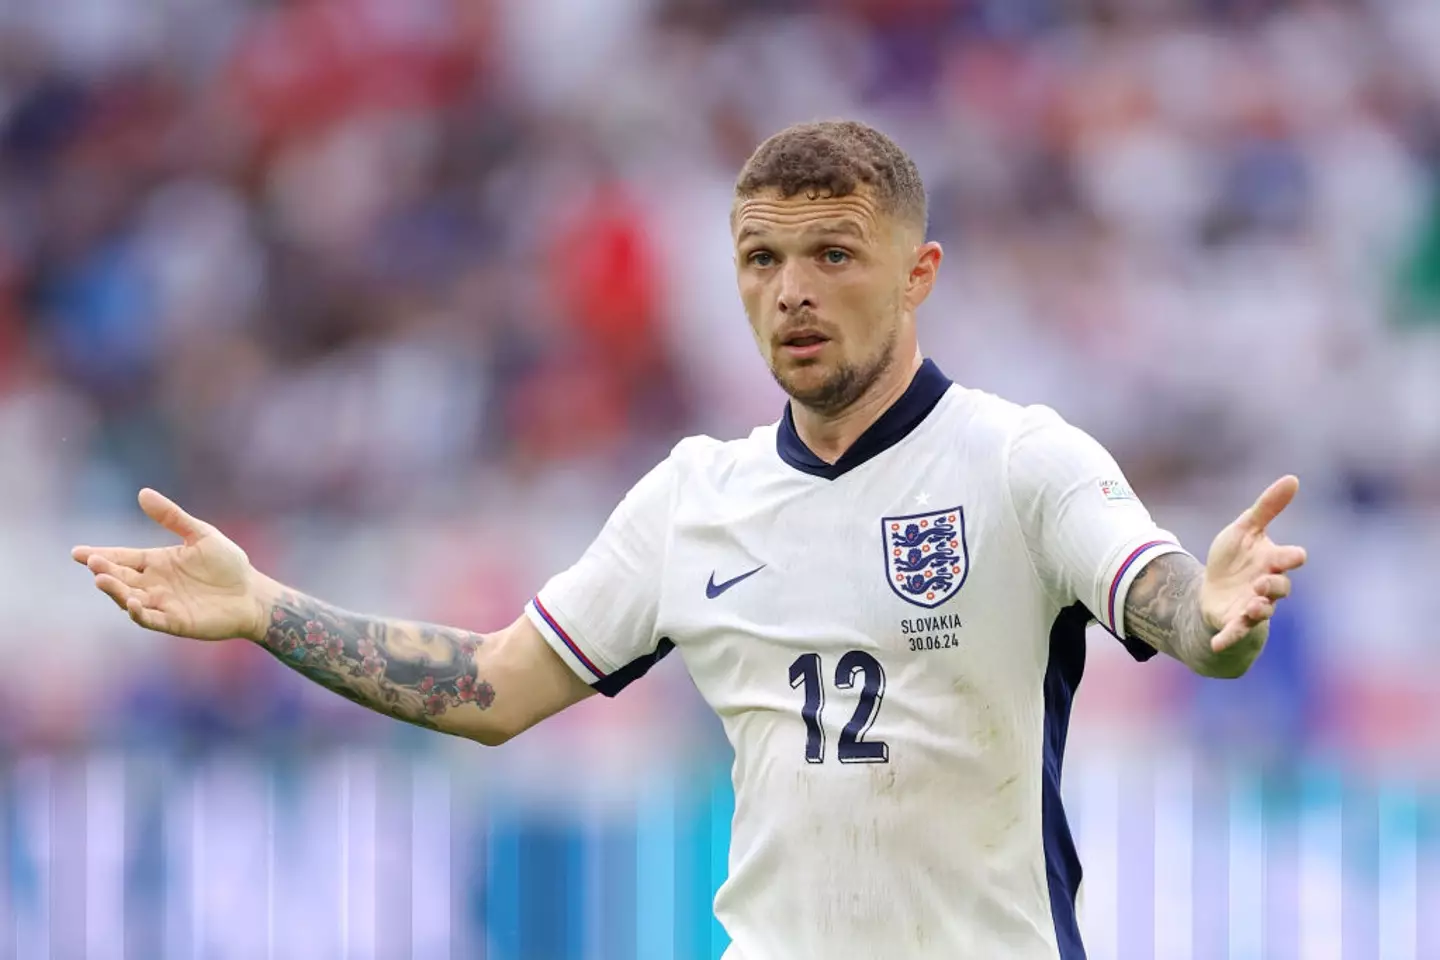 Trippier is expected to be fit to face Switzerland (Image: Getty)